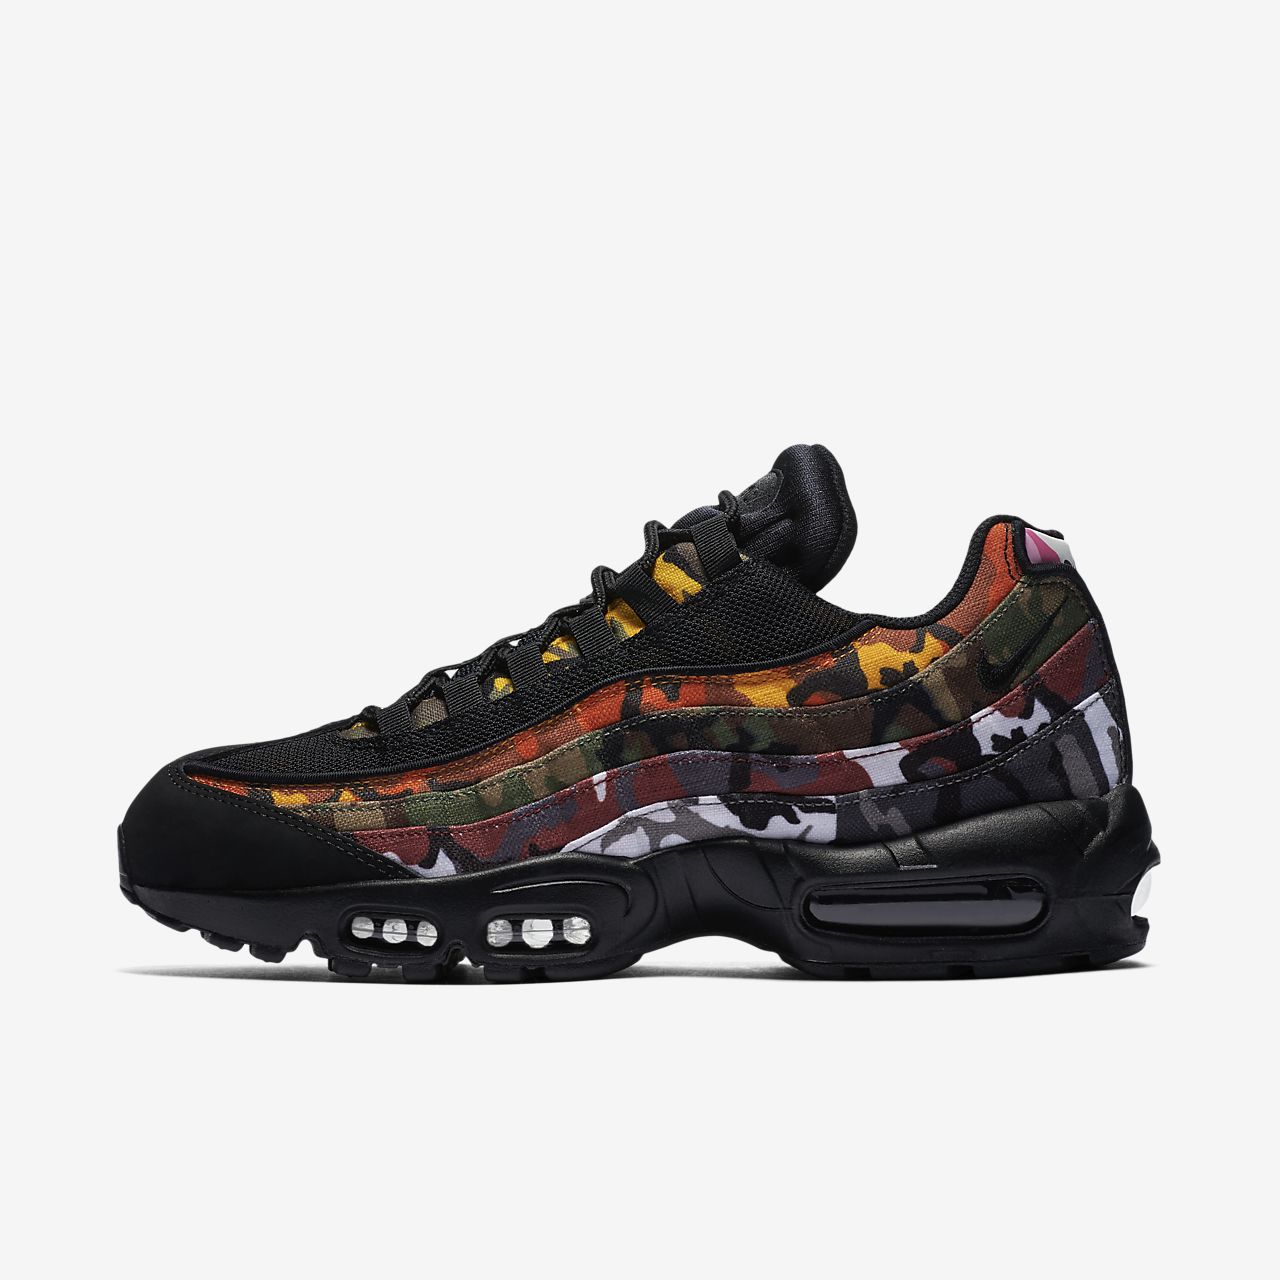 Chaussure Nike Air Max 95 OG MC SP pour Homme